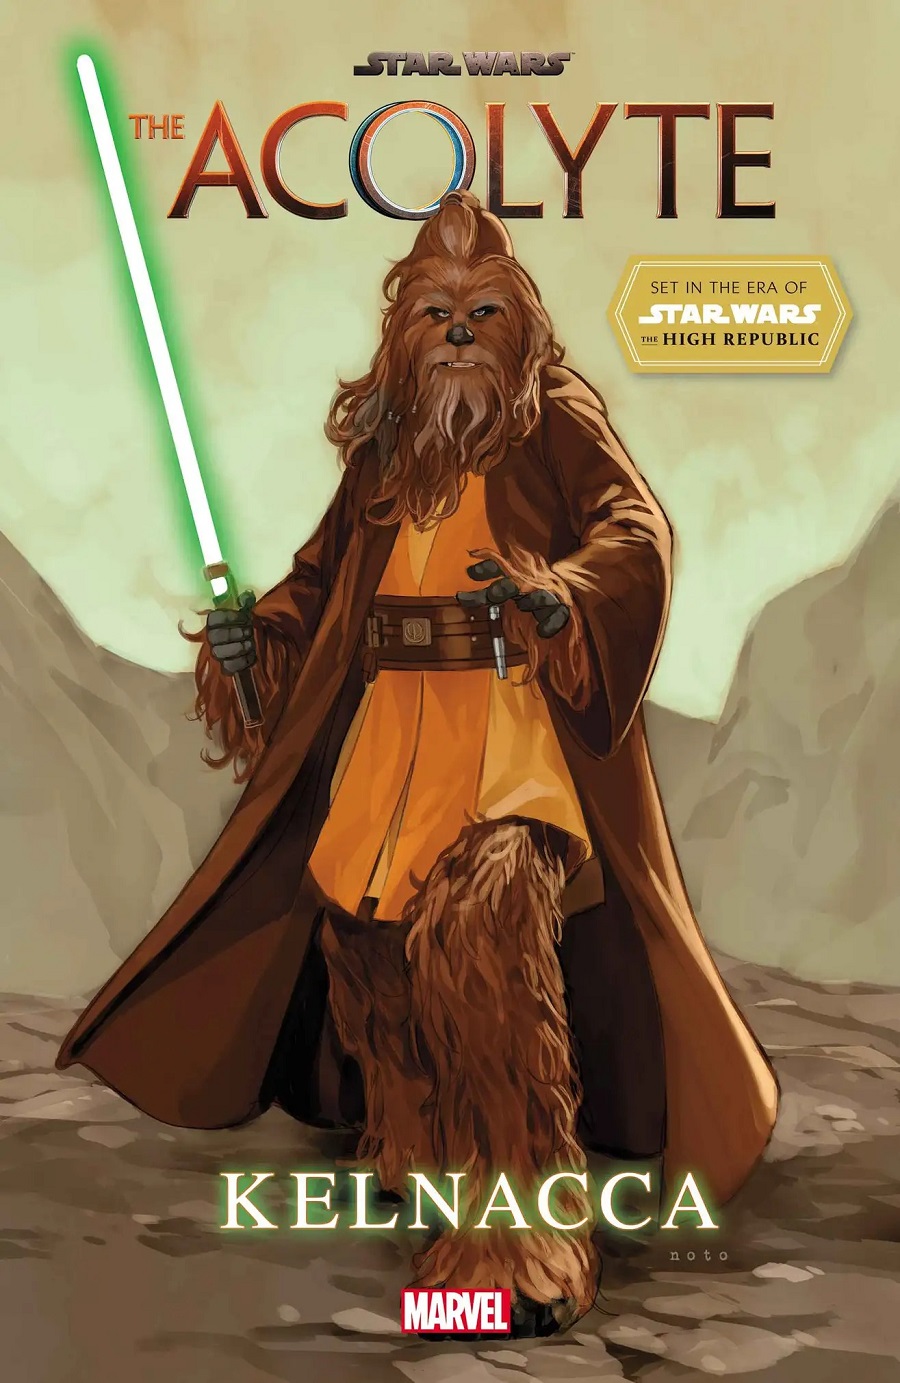 https://www.starwars-universe.com/images/actualites/Litterature/marvel/acolyte_OS.jpg